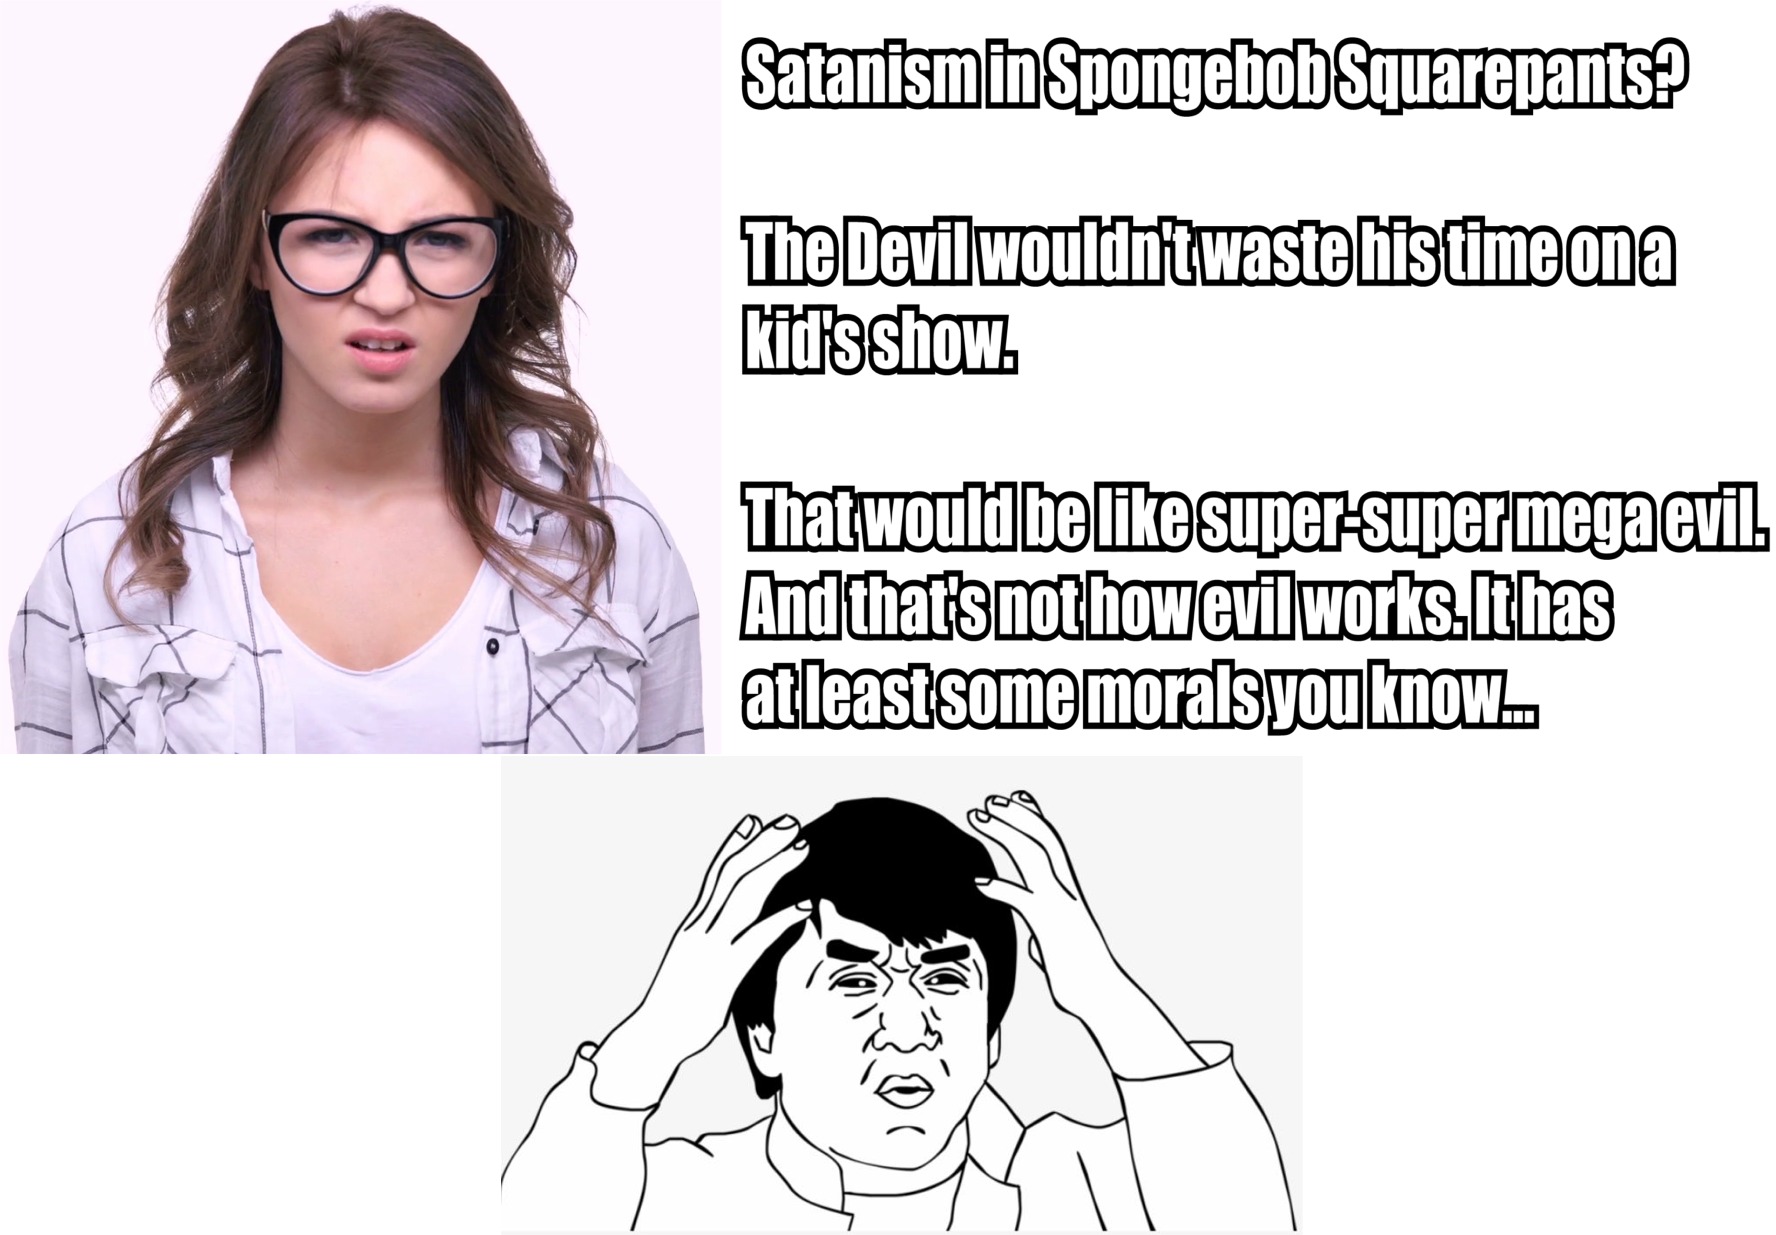 glasses - Satanism in Spongebob Squarepants? The Devilwouldn'twastehistimeona kid's show. That would be supersupermega evil. And that's not howevil works. It has at least some morals you know.